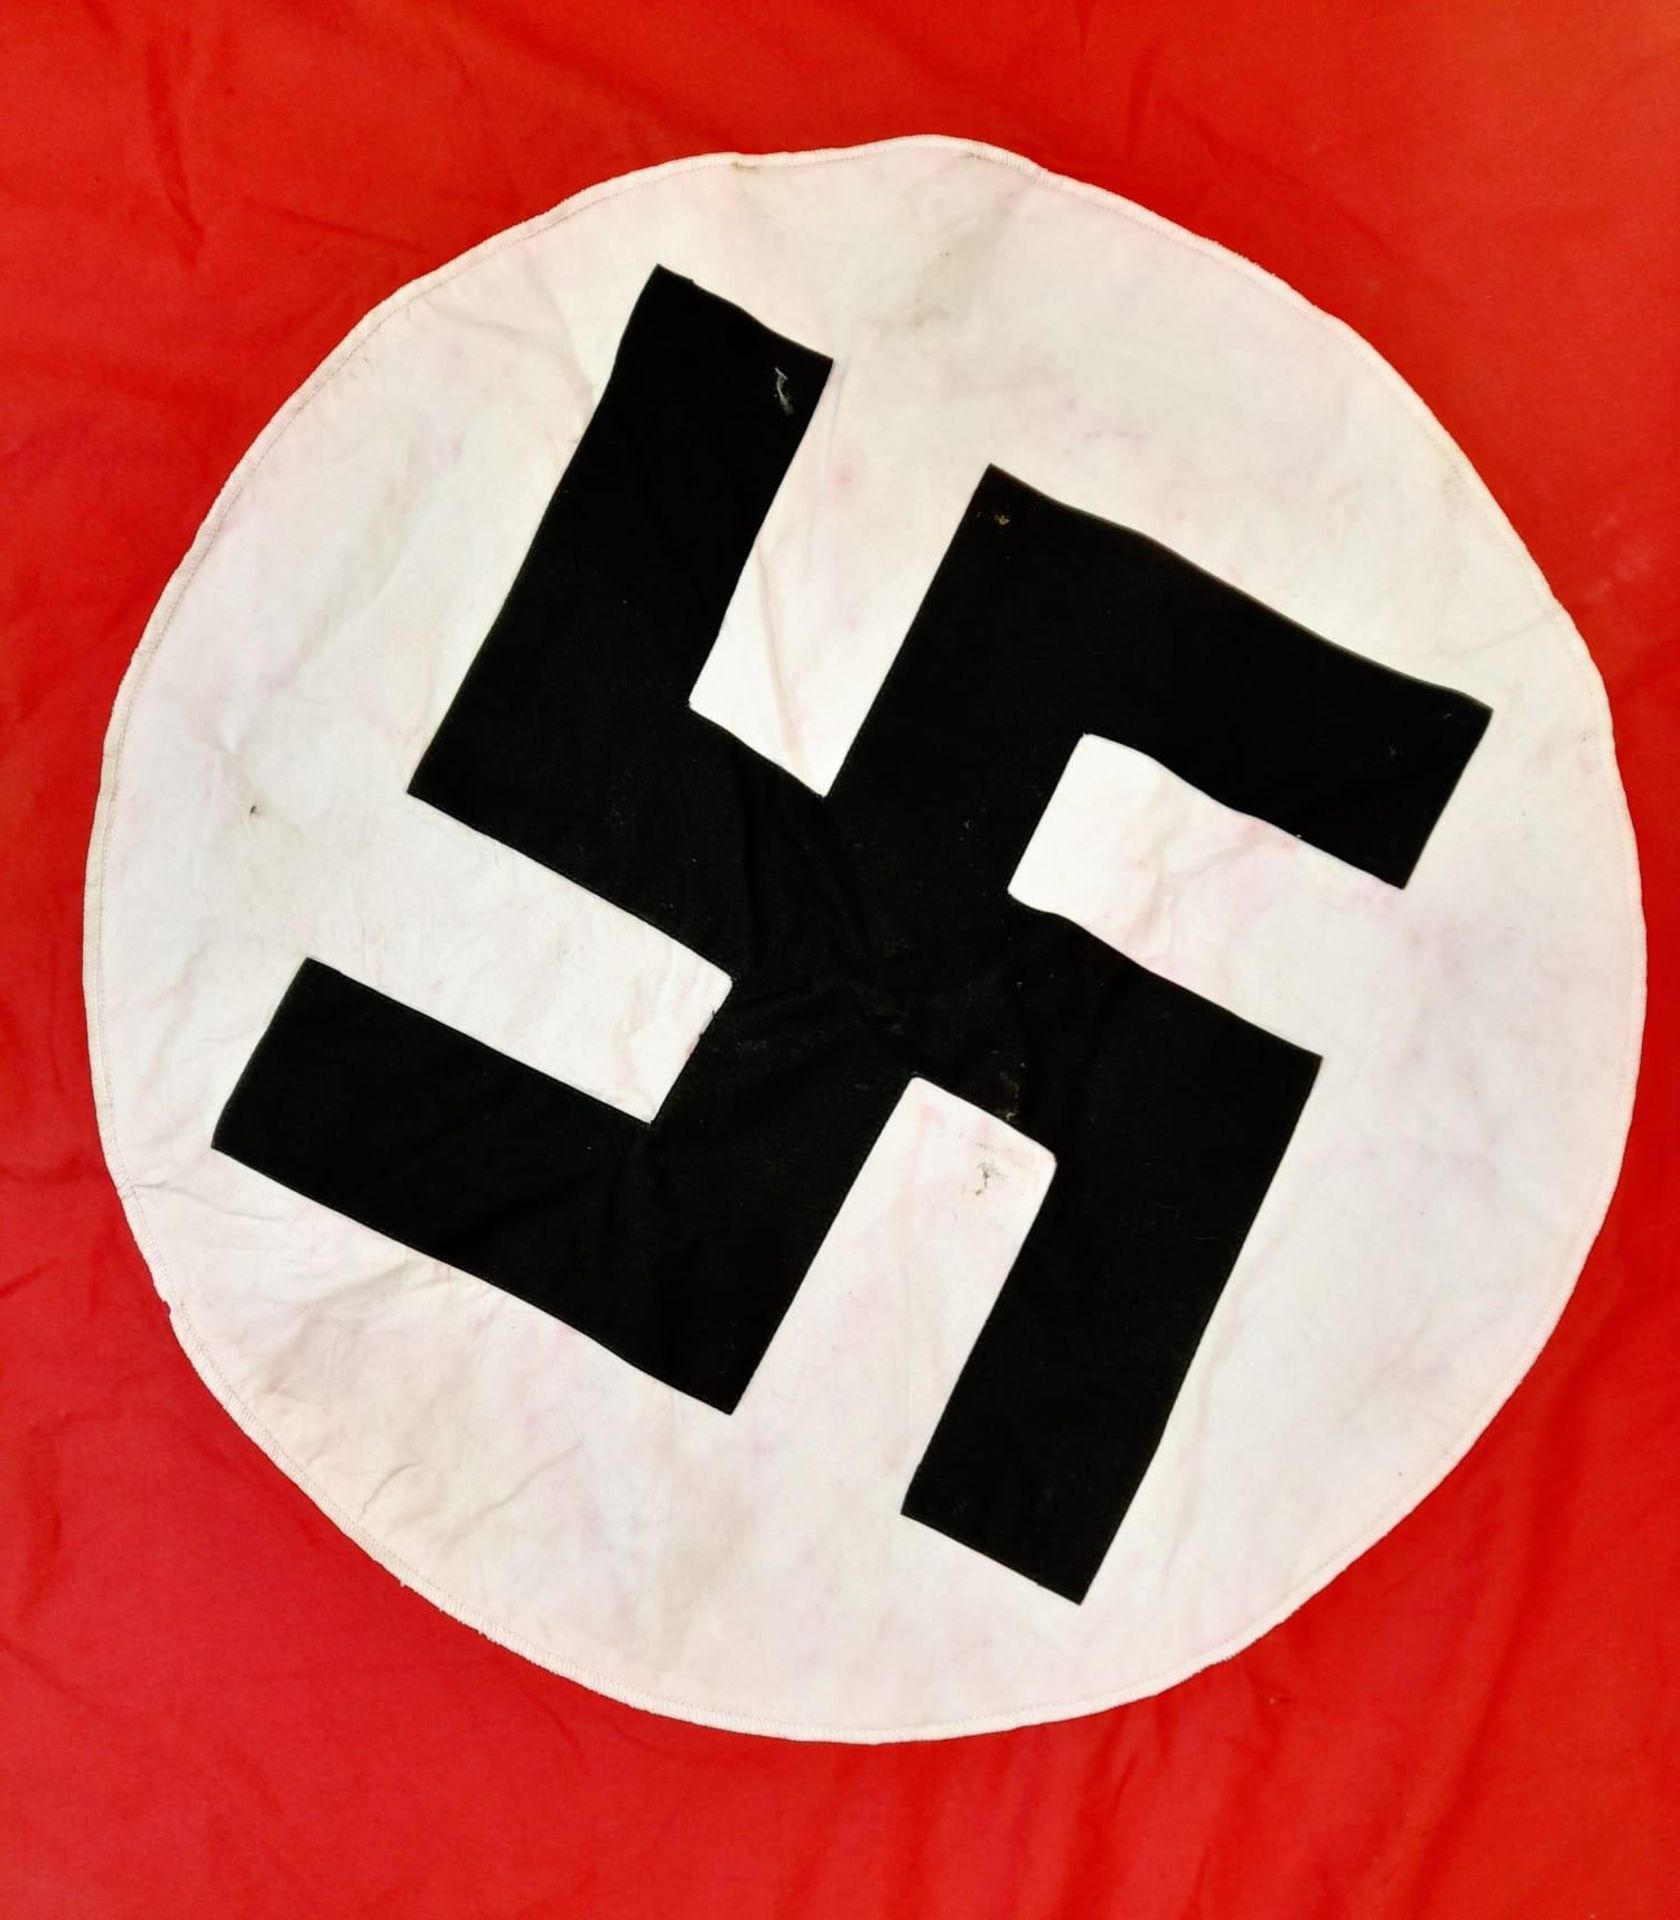 3rd Reich NSDAP Drape. These were hung from Windows and balconies etc. - Bild 2 aus 3